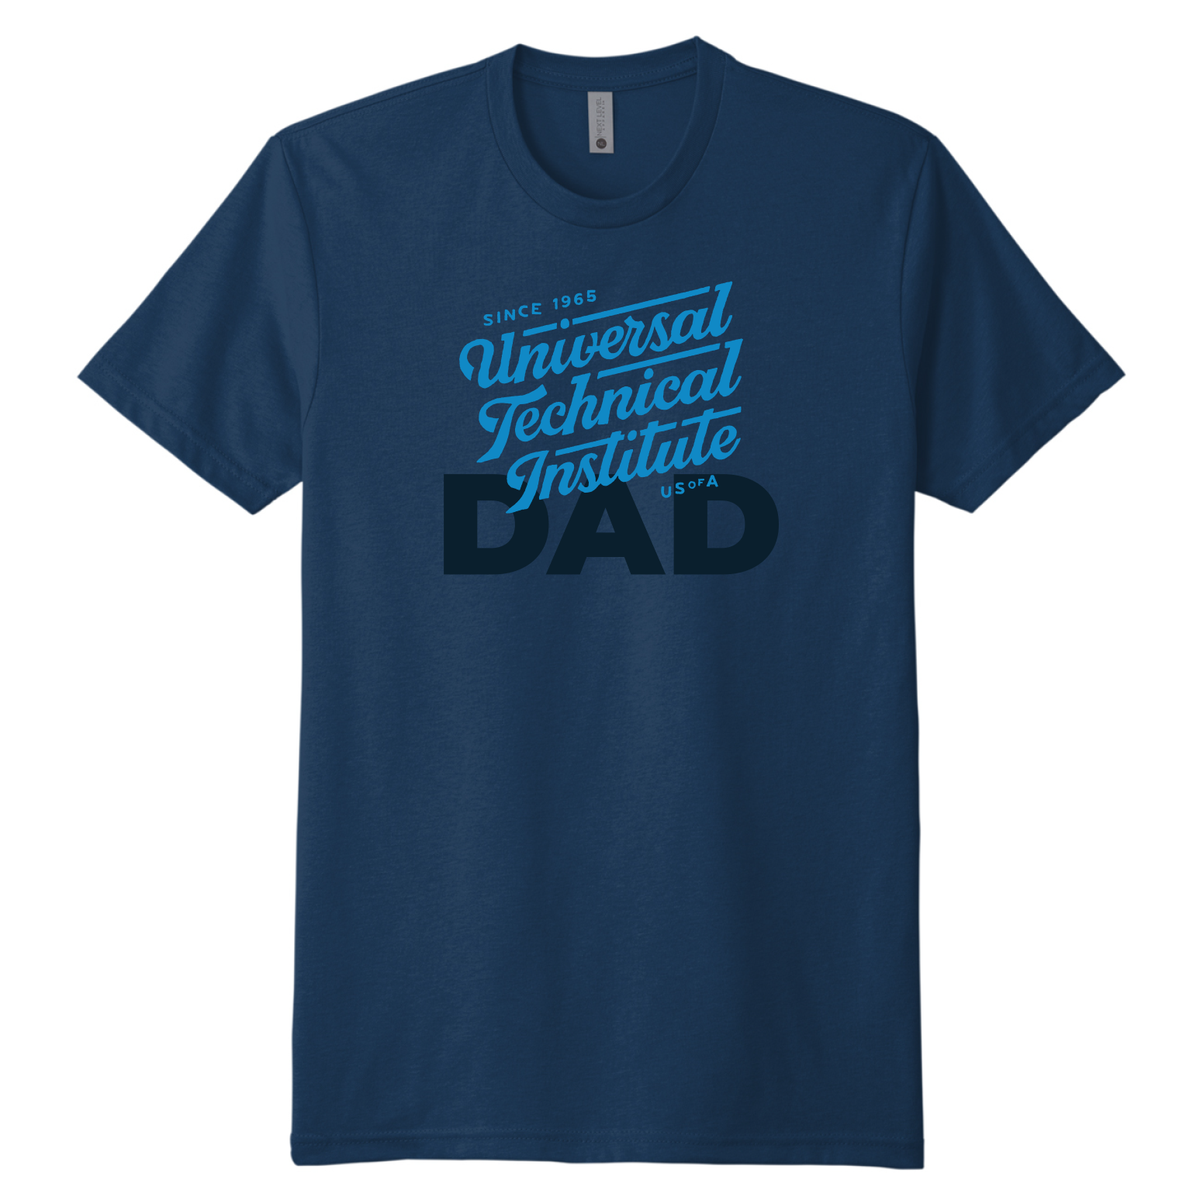 Universal Technical Institute DAD T-Shirt